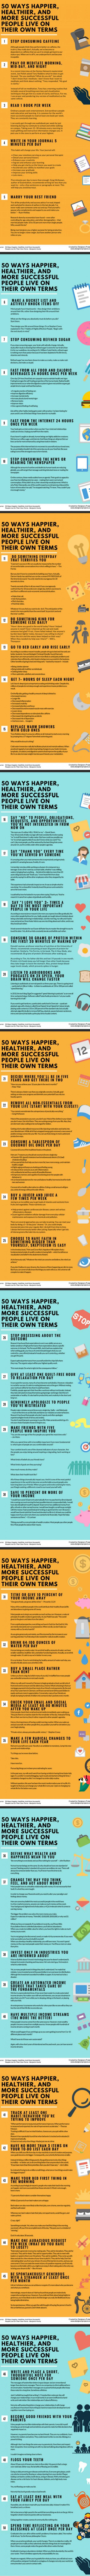 50+Ways+Successful+People+Live+On+Their+Own+Terms.